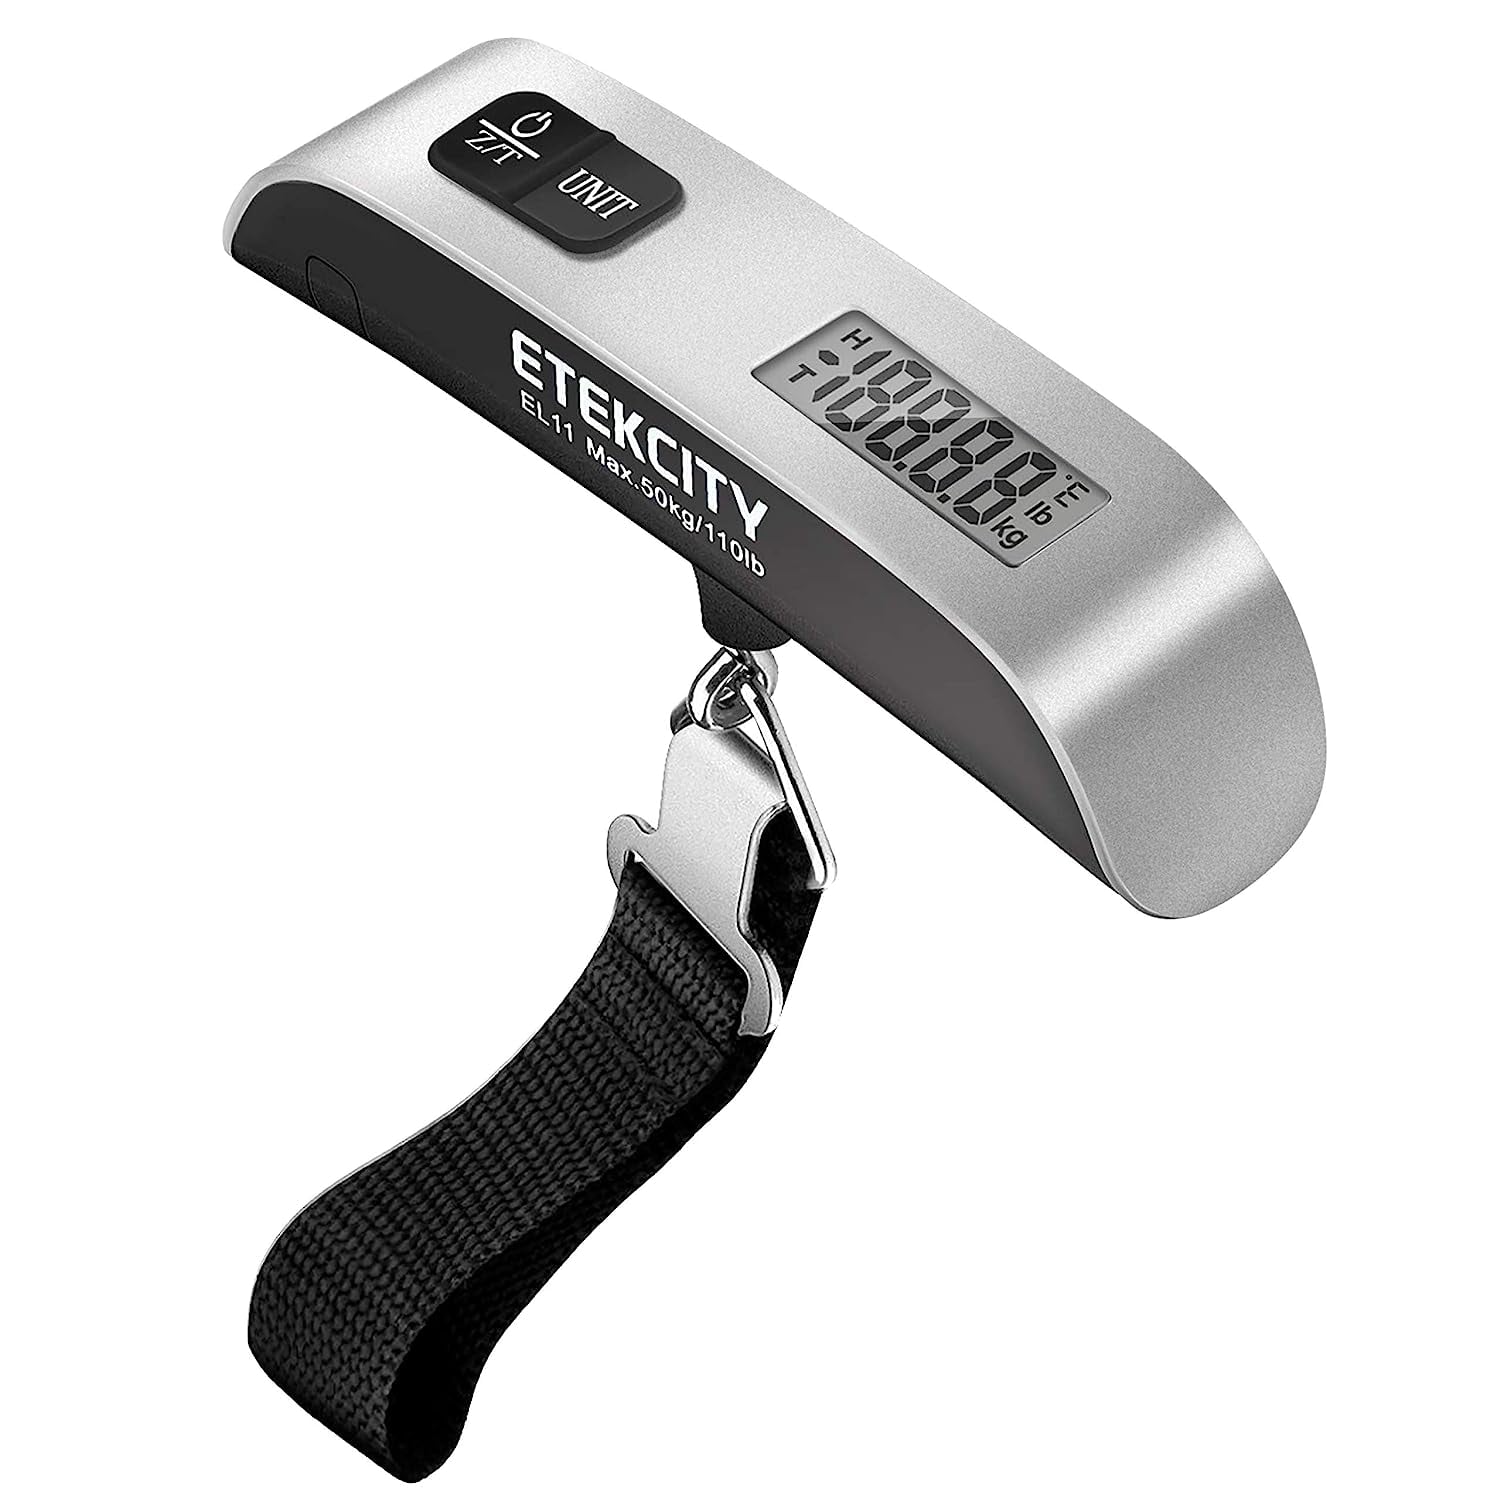 <p><a href="https://www.amazon.com/Etekcity-Digital-Luggage-Scale-Temperature/dp/B00NW62PCA">BUY NOW</a></p><p>$12</p><p><a href="https://www.amazon.com/Etekcity-Digital-Luggage-Scale-Temperature/dp/B00NW62PCA" class="ga-track"><strong>Etekcity Luggage Scale</strong></a> ($12) </p><p>"My luggage scale is probably my favorite travel purchase to date," says Mansel. "I packed a smaller suitcase on a recent trip to London, but I was still concerned the contents of the bag had pushed it over the weight limit. The morning before my flight, I quickly weighed the suitcase and felt a sense of relief when I saw the numbers flash '42.' Anything over 50 pounds couldn't have resulted in the completely avoidable overweight luggage fee."</p>